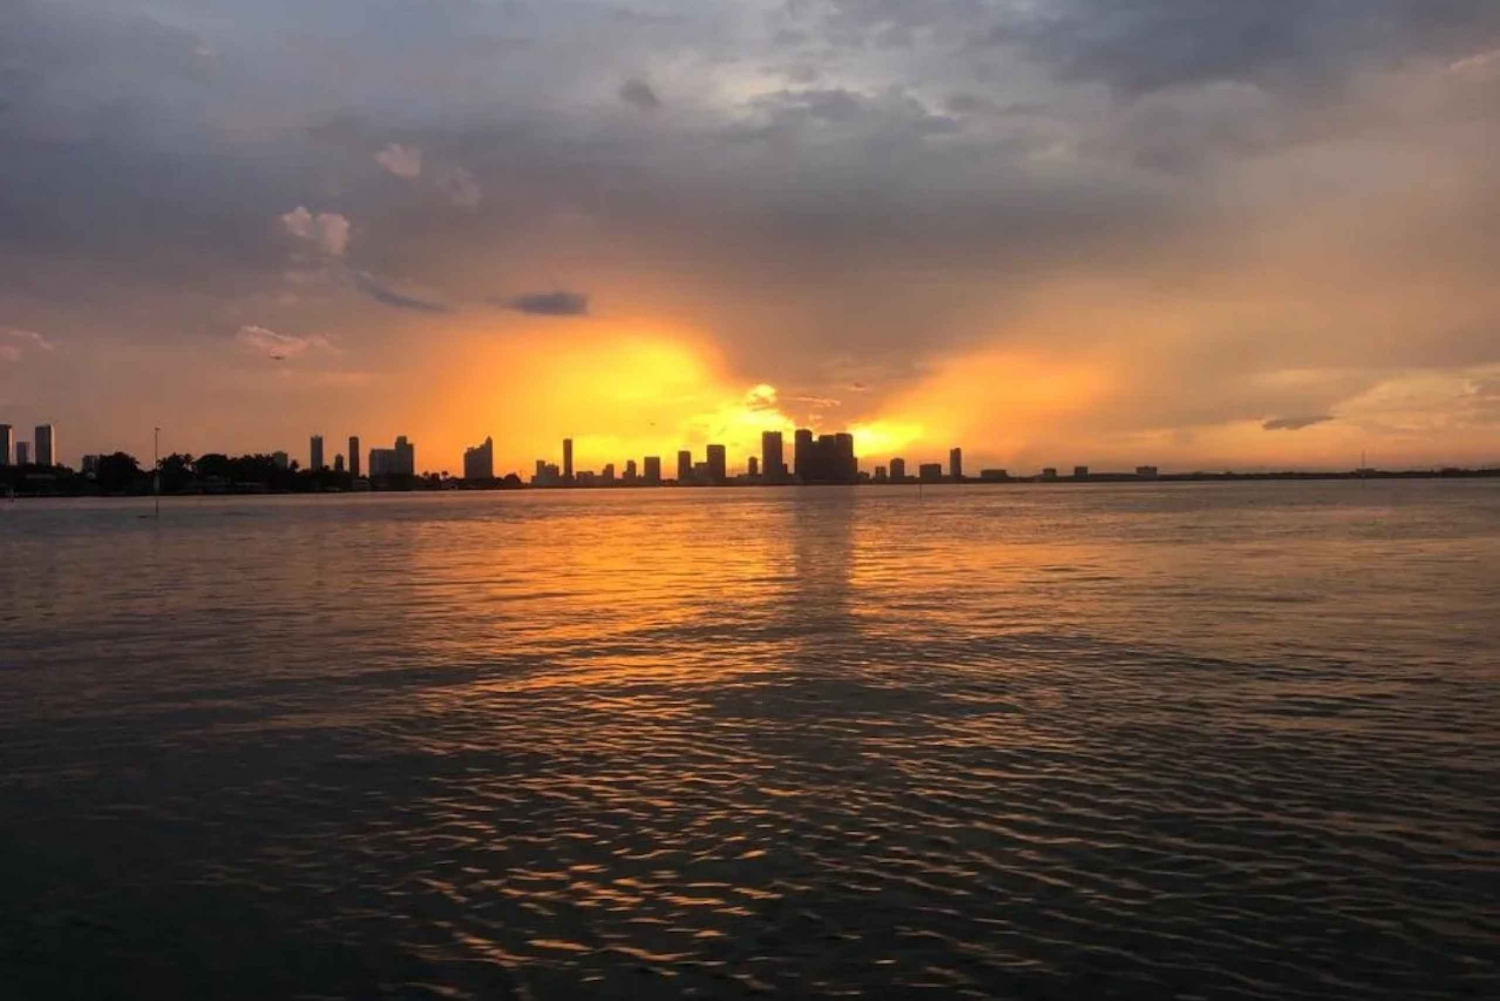 Miami: Private Sunset Boat Tour with Bottle of Champagne